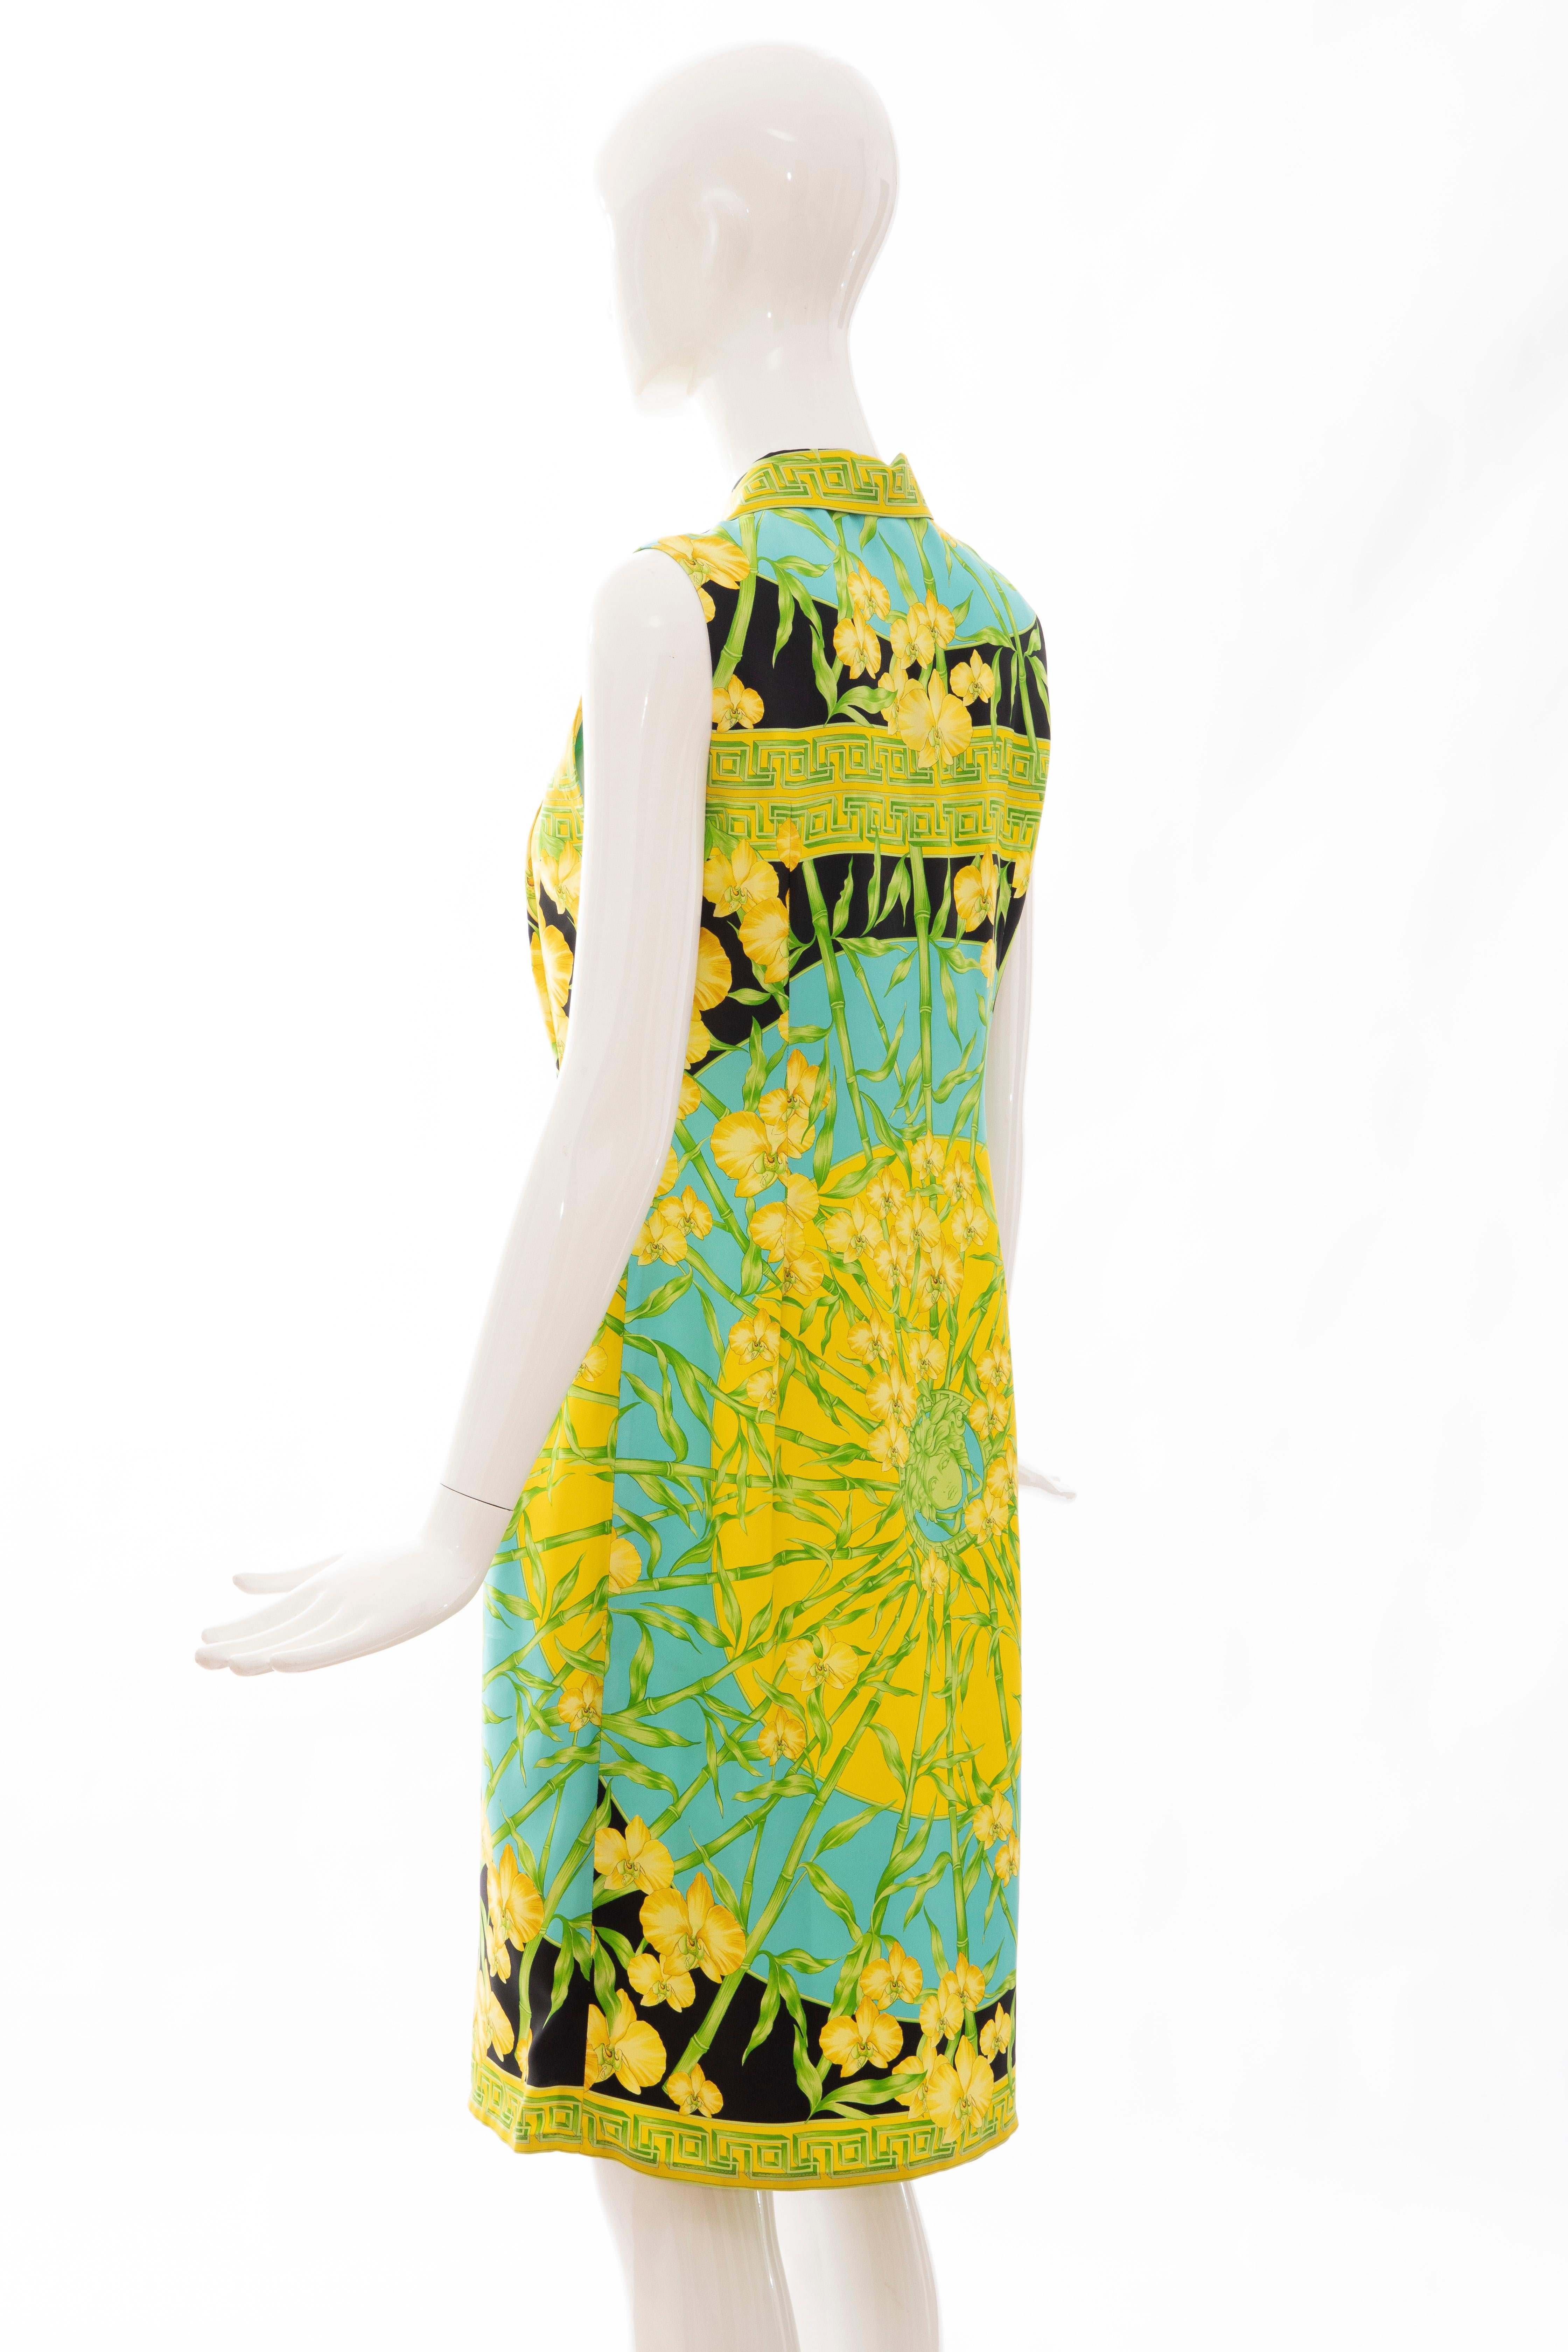 Gianni Versace Couture Silk Printed Yellow Orchids Sheath Dress, Circa: 1990's 3